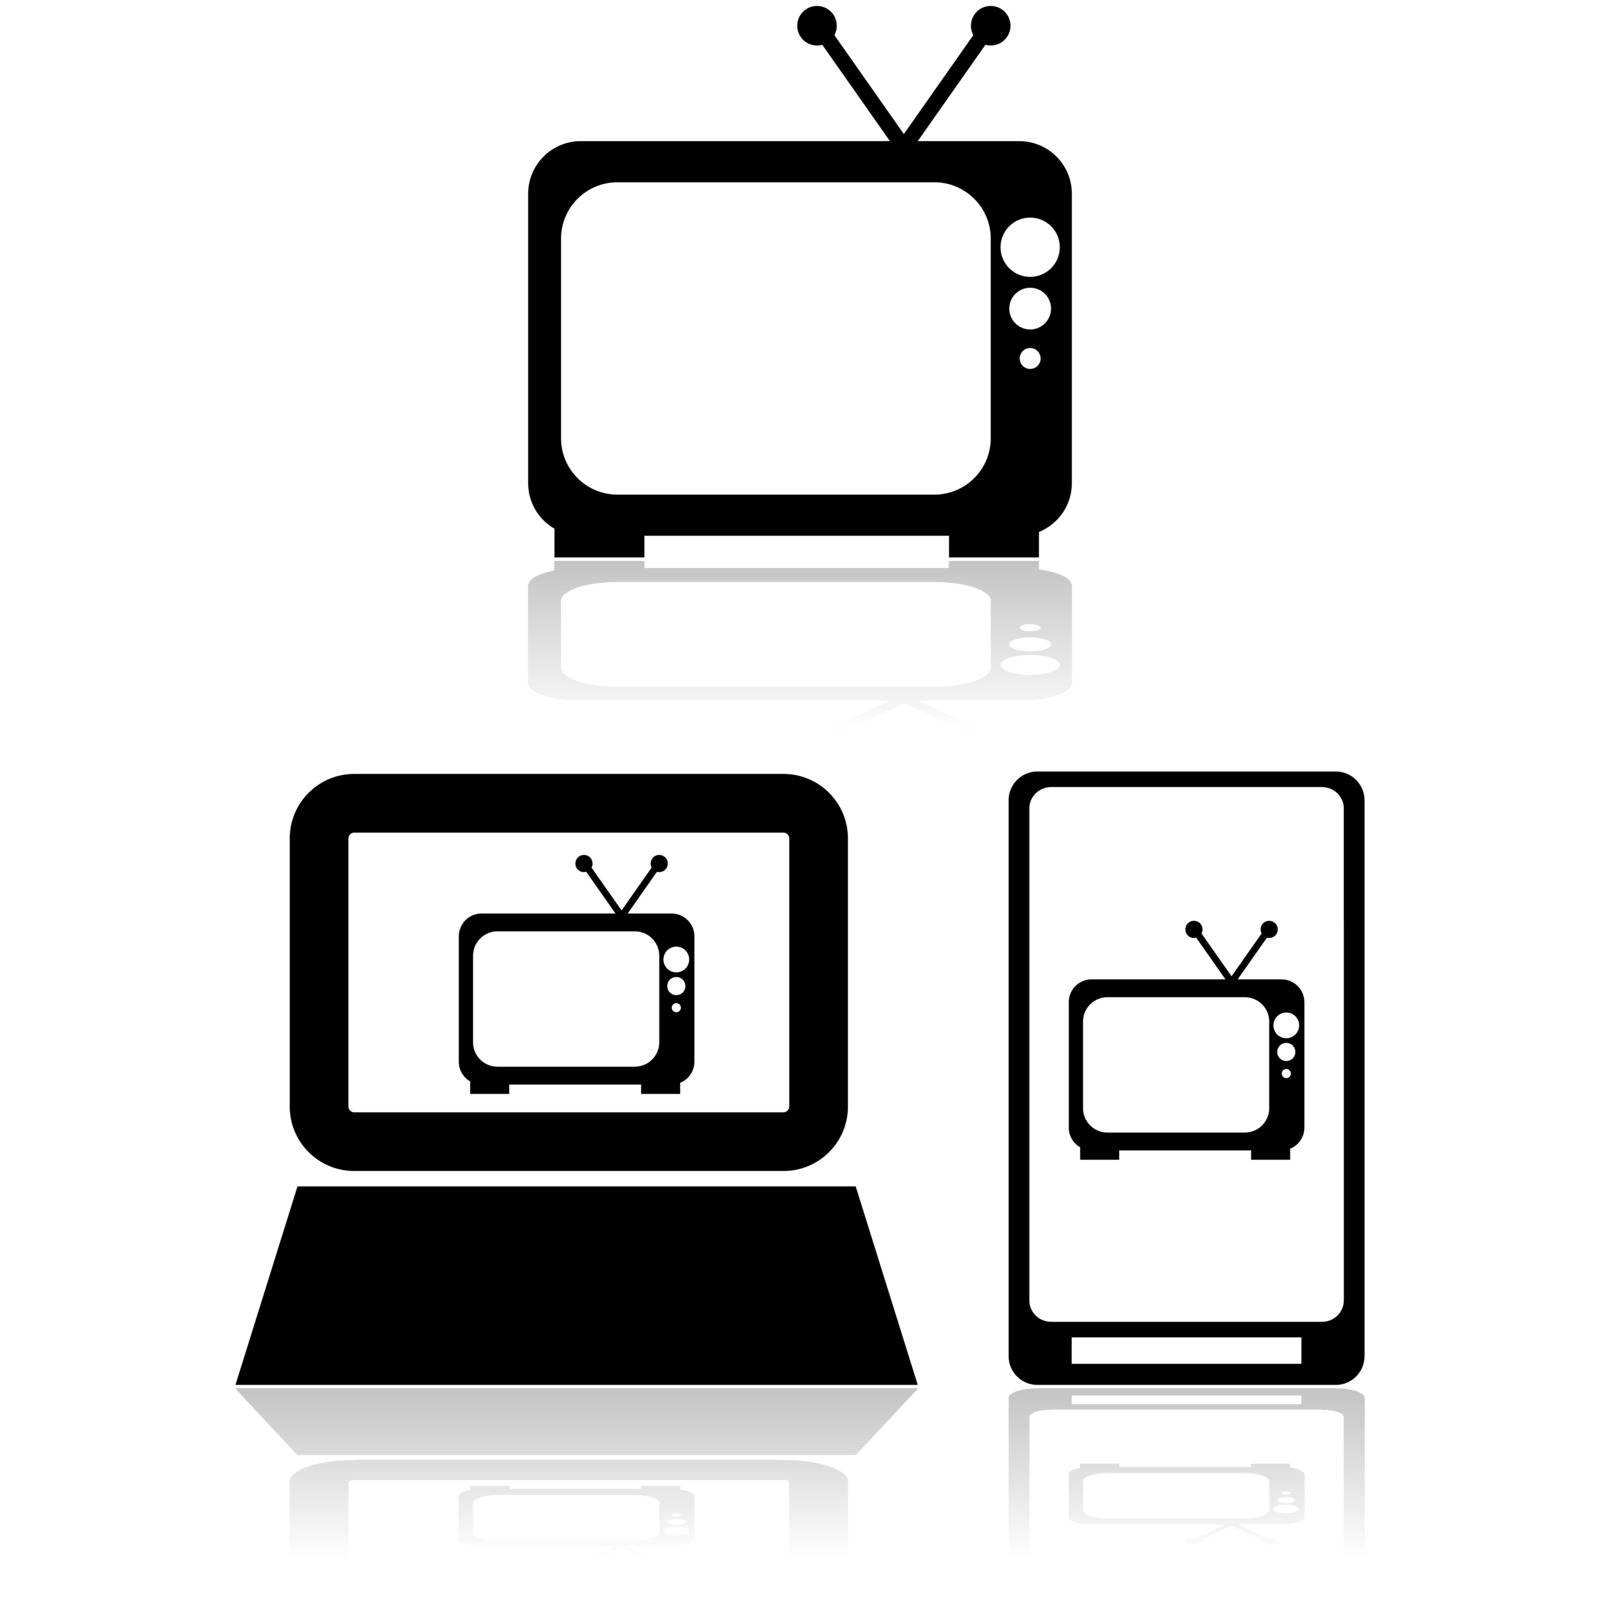 Icon set showing an old television set by itself and also inside a computer and mobile device